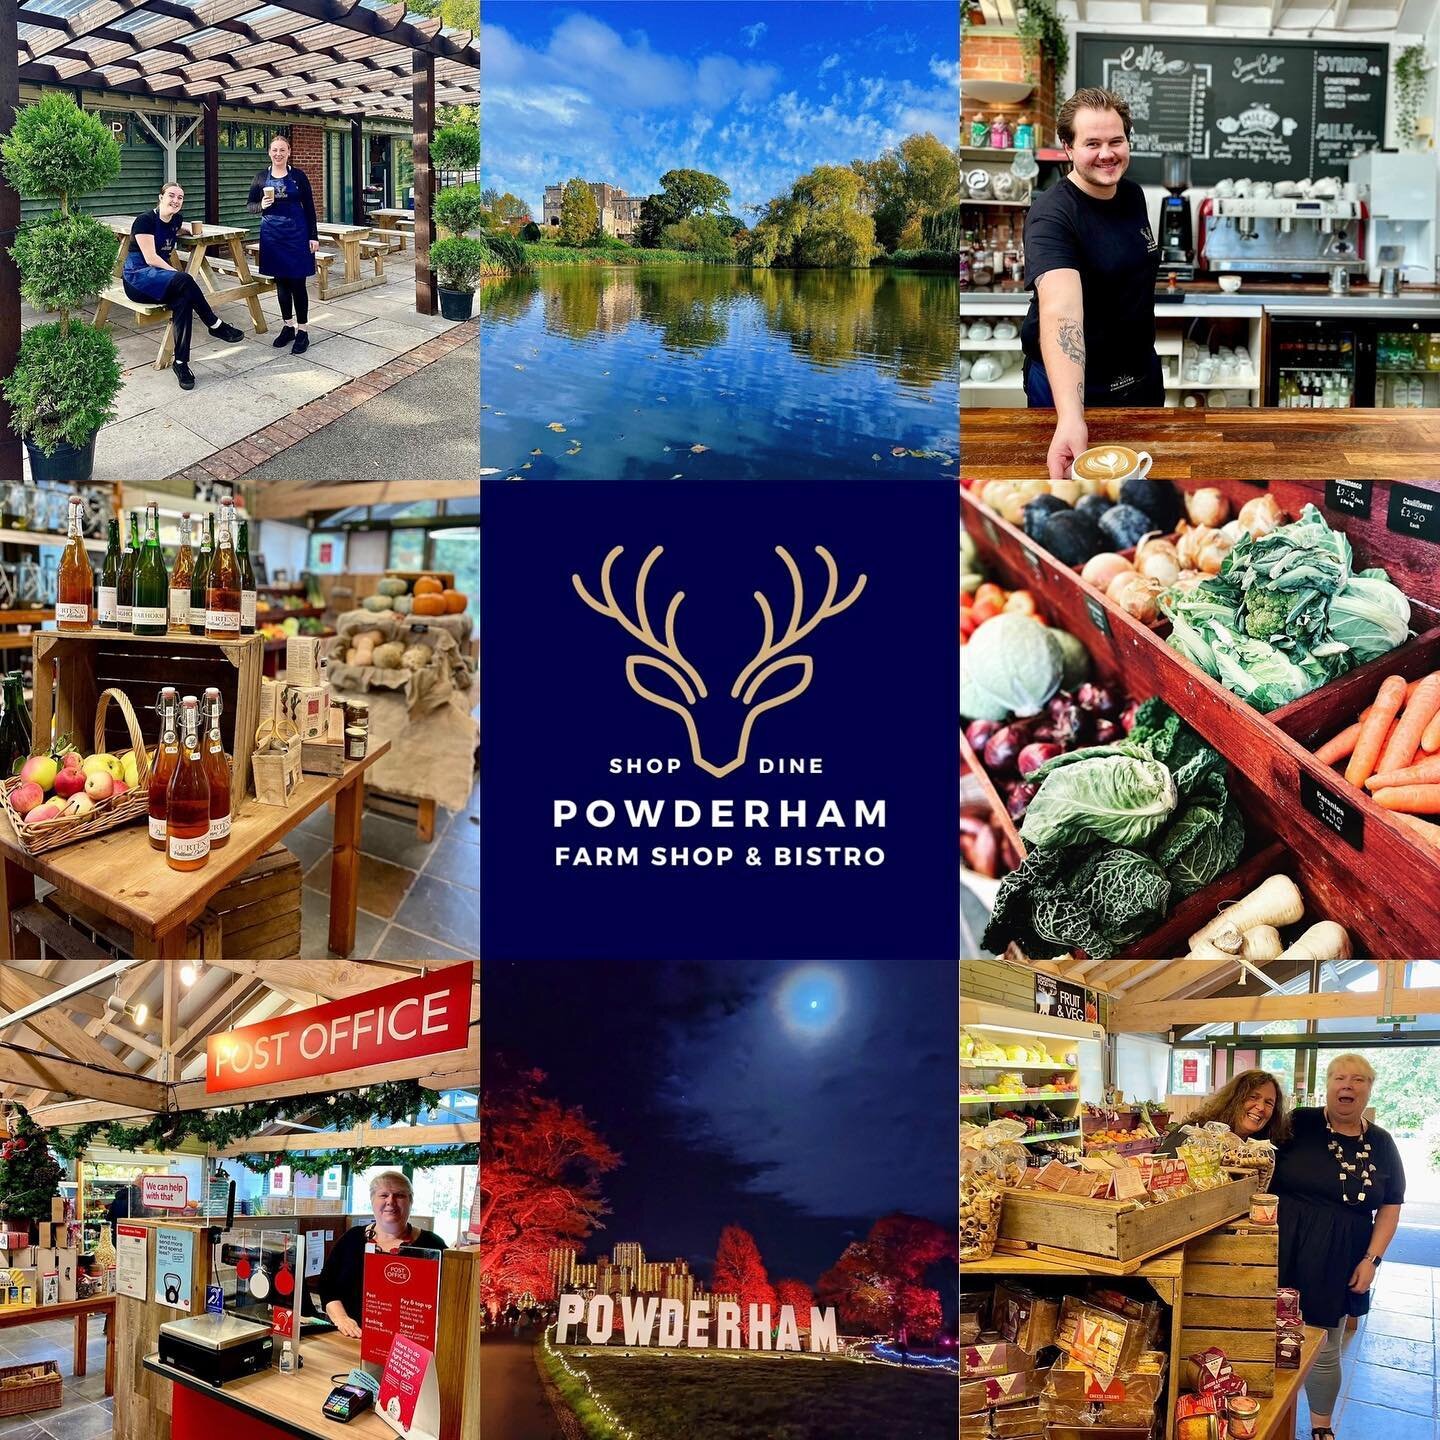 Announcement - Powderham Farm Shop &amp; Bistro is For Sale.

Owners Tom &amp; Leanne are incredibly grateful to their customers, staff, and suppliers for their custom, loyalty, and support. However, after five, happy years at the helm, they are list